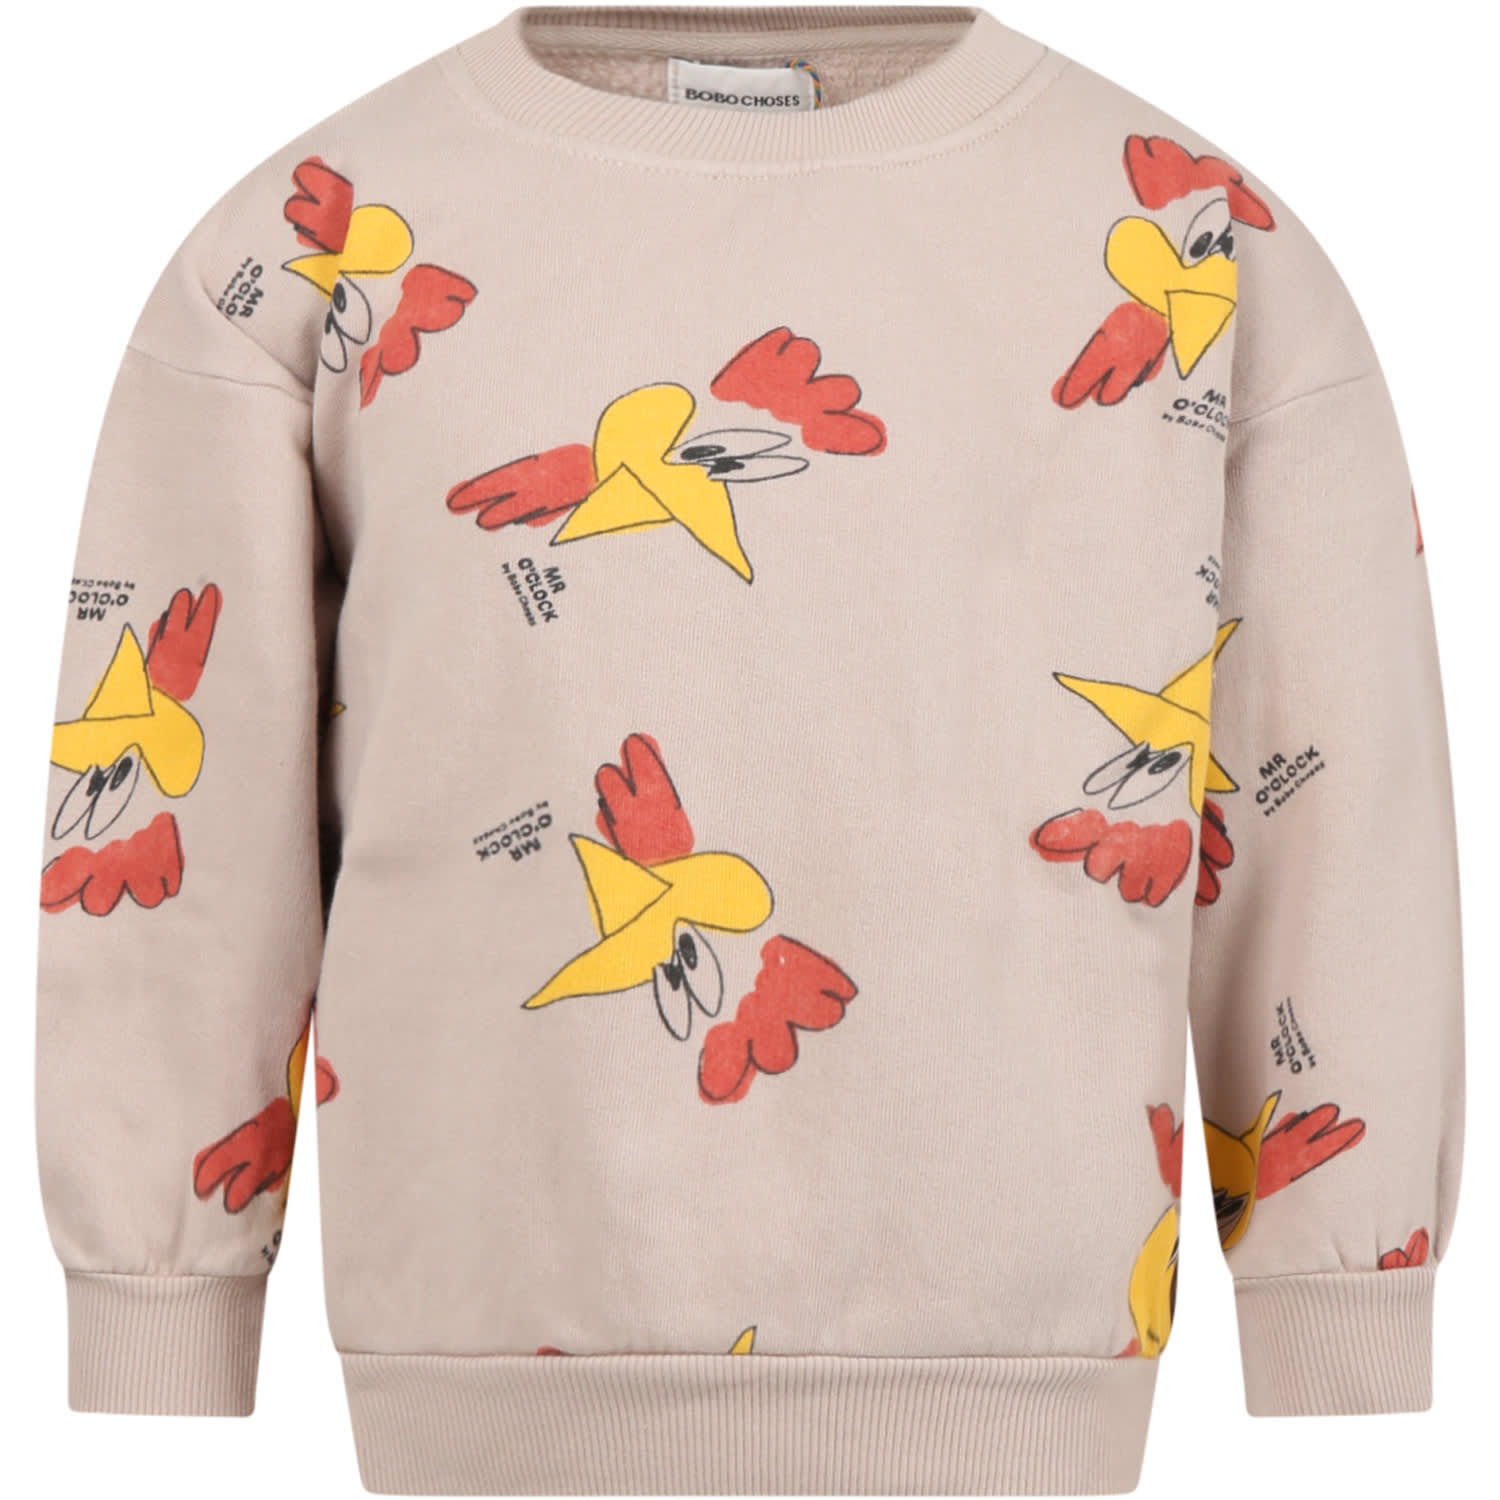 Bobo Choses Beige Sweatshirt For Boy With Roosters